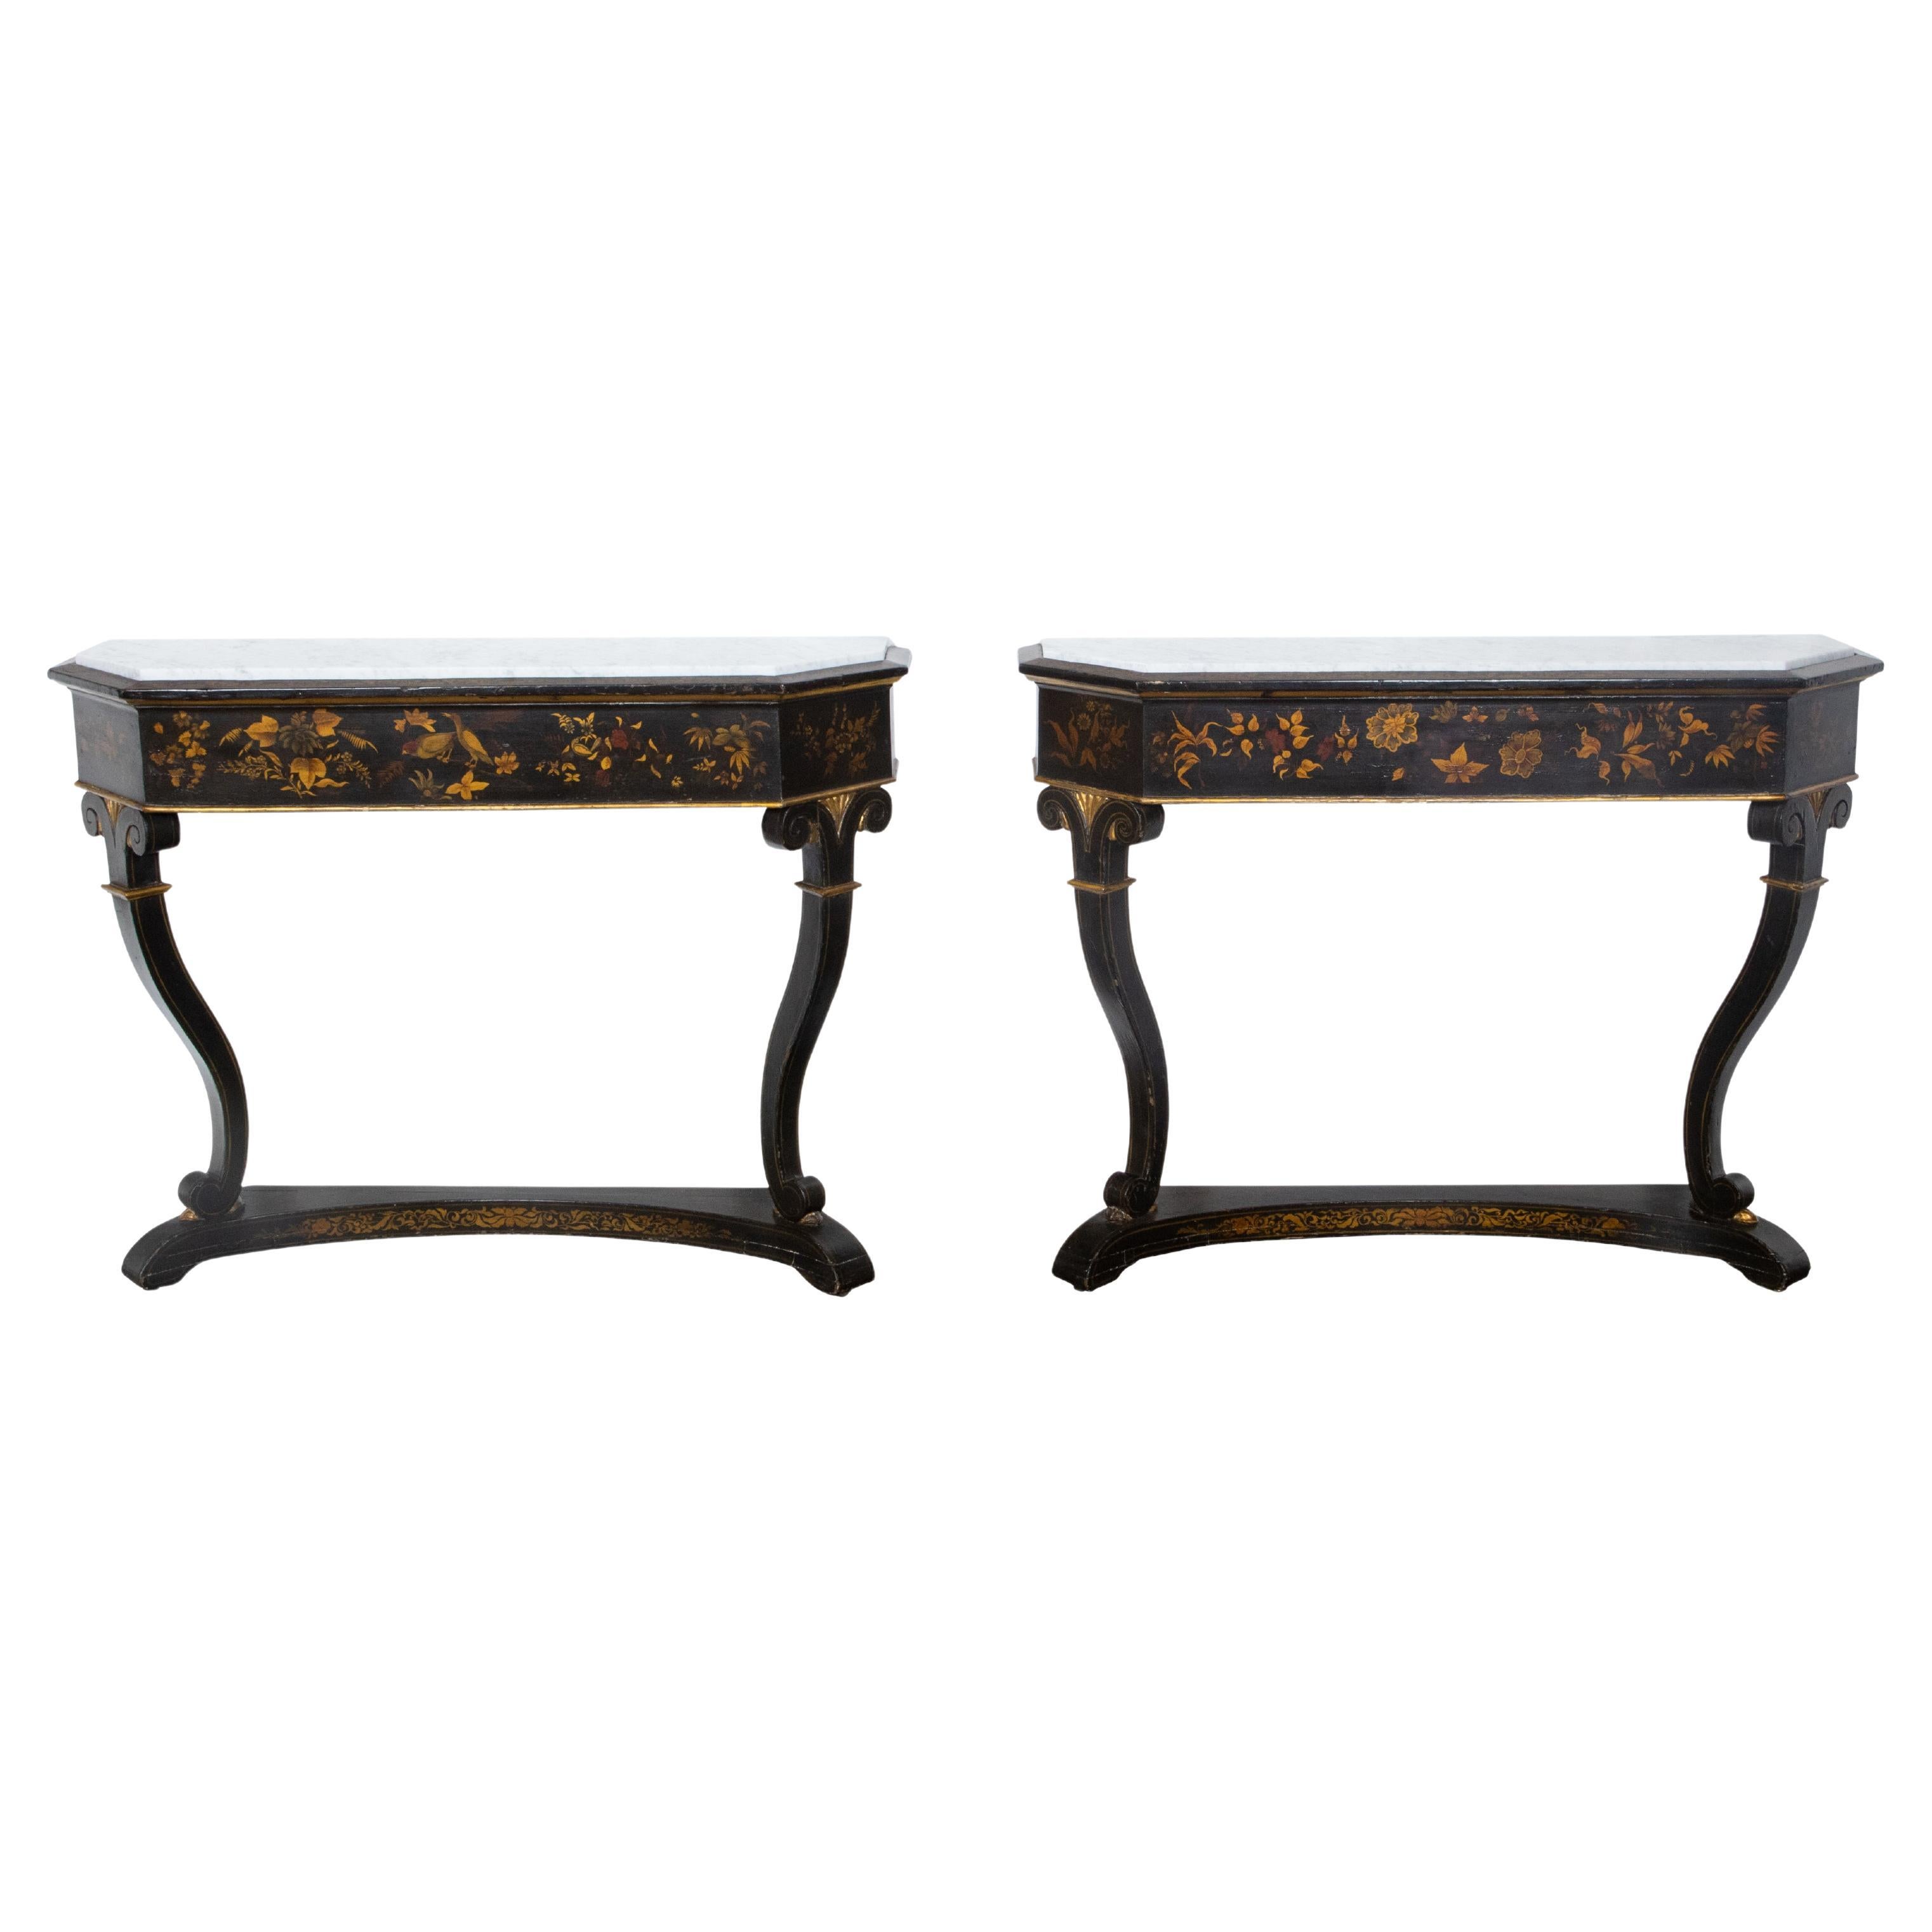 English Chinoiserie Black and Gold Console Tables with White Marble Tops, a Pair